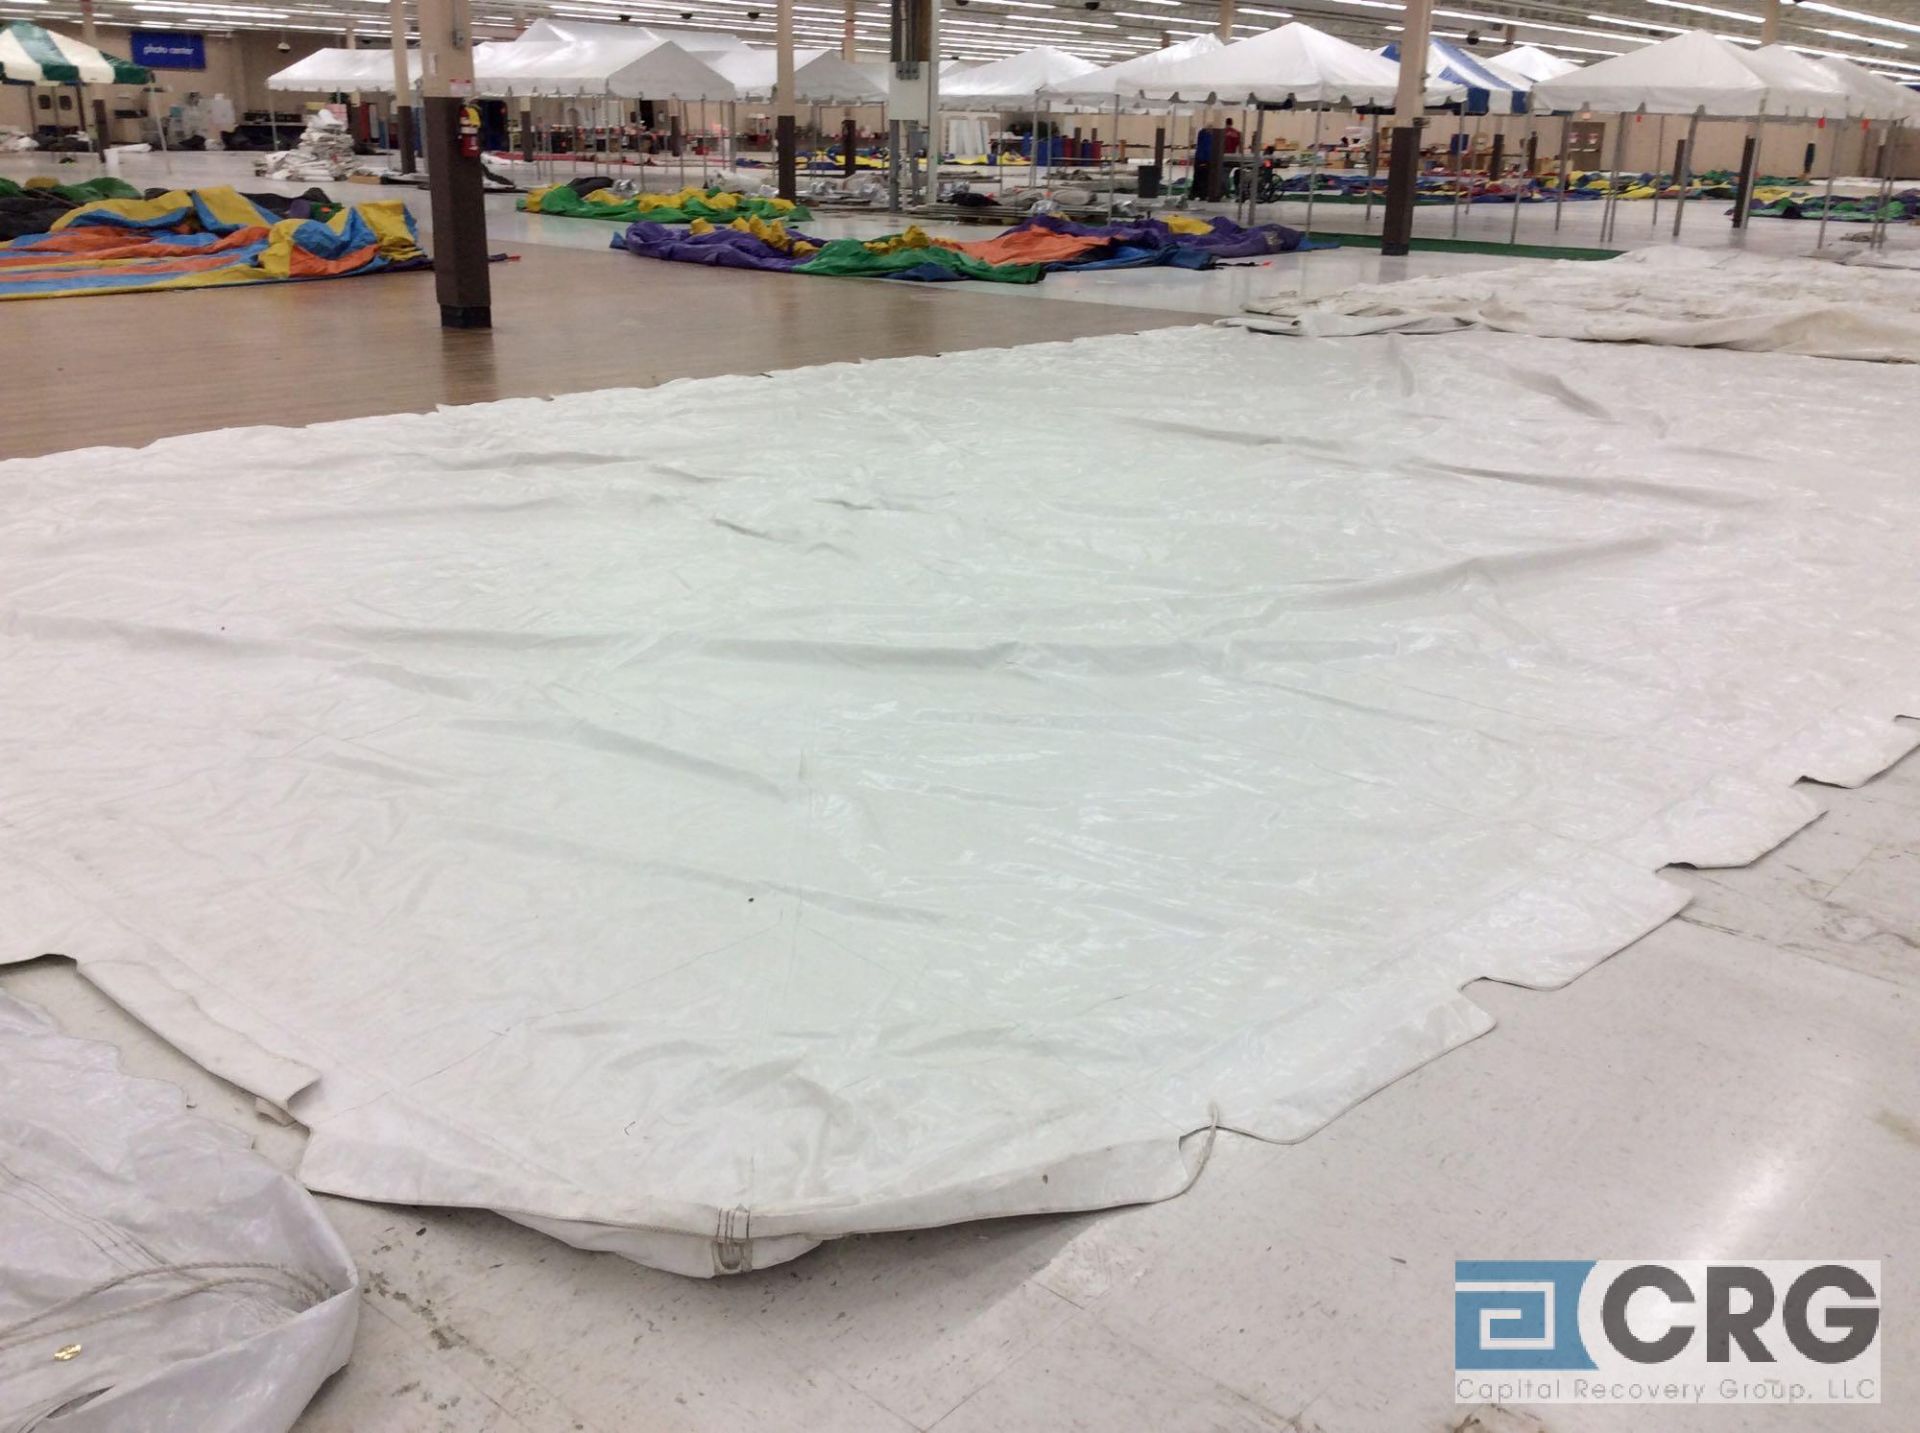 Anchor 20' x 40' white tent top, top only. Buyer is responsible to fold for removal. Some corners